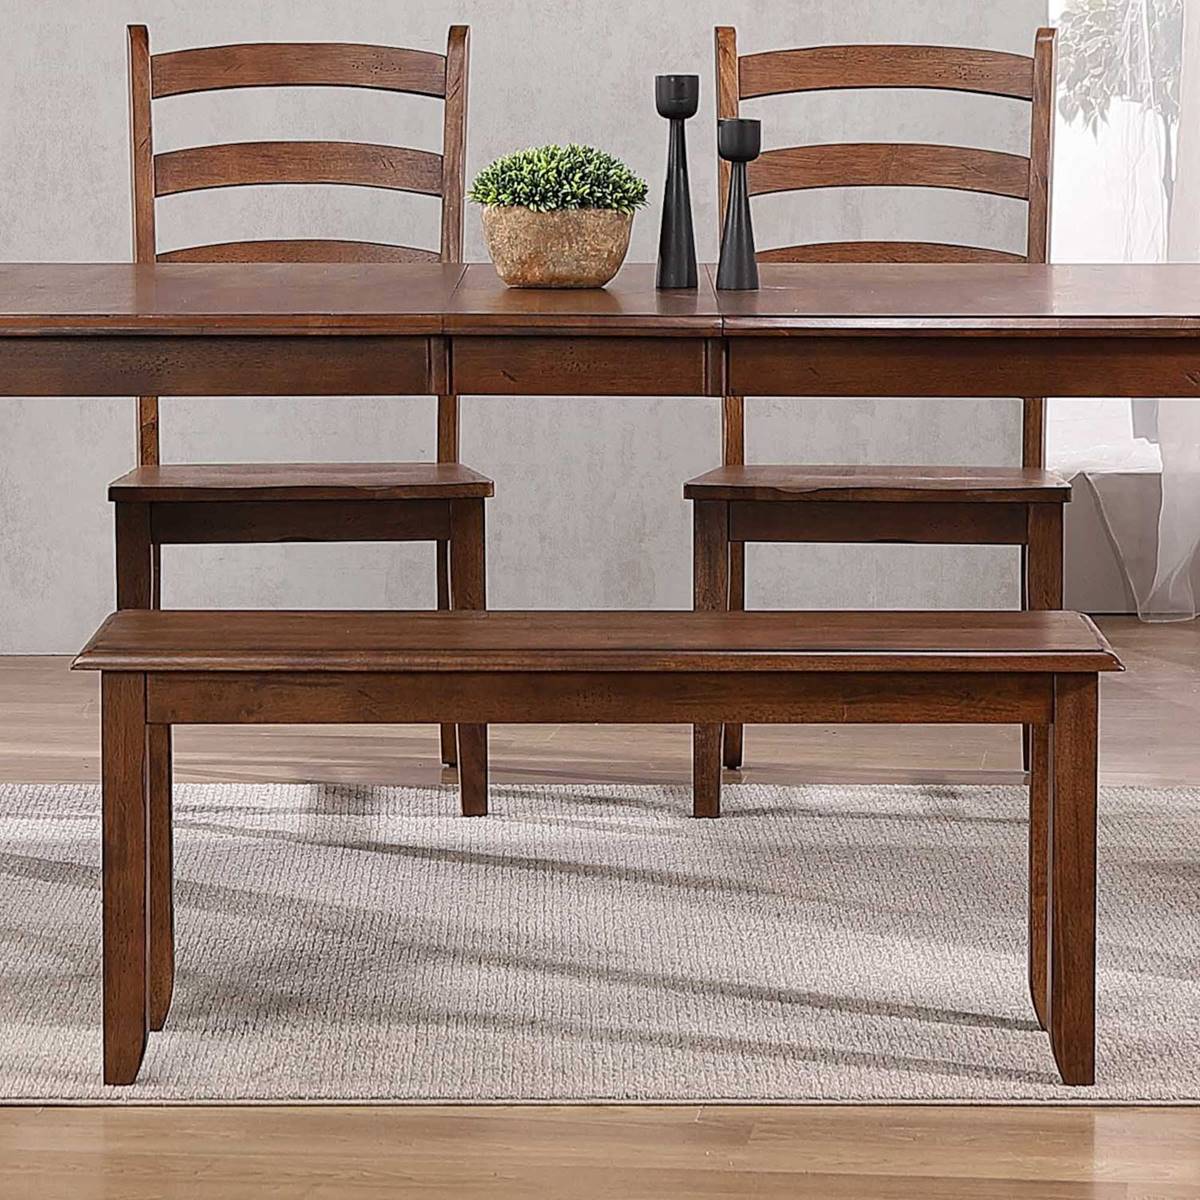 Besthom Simply Brook Amish Brown Dining Bench